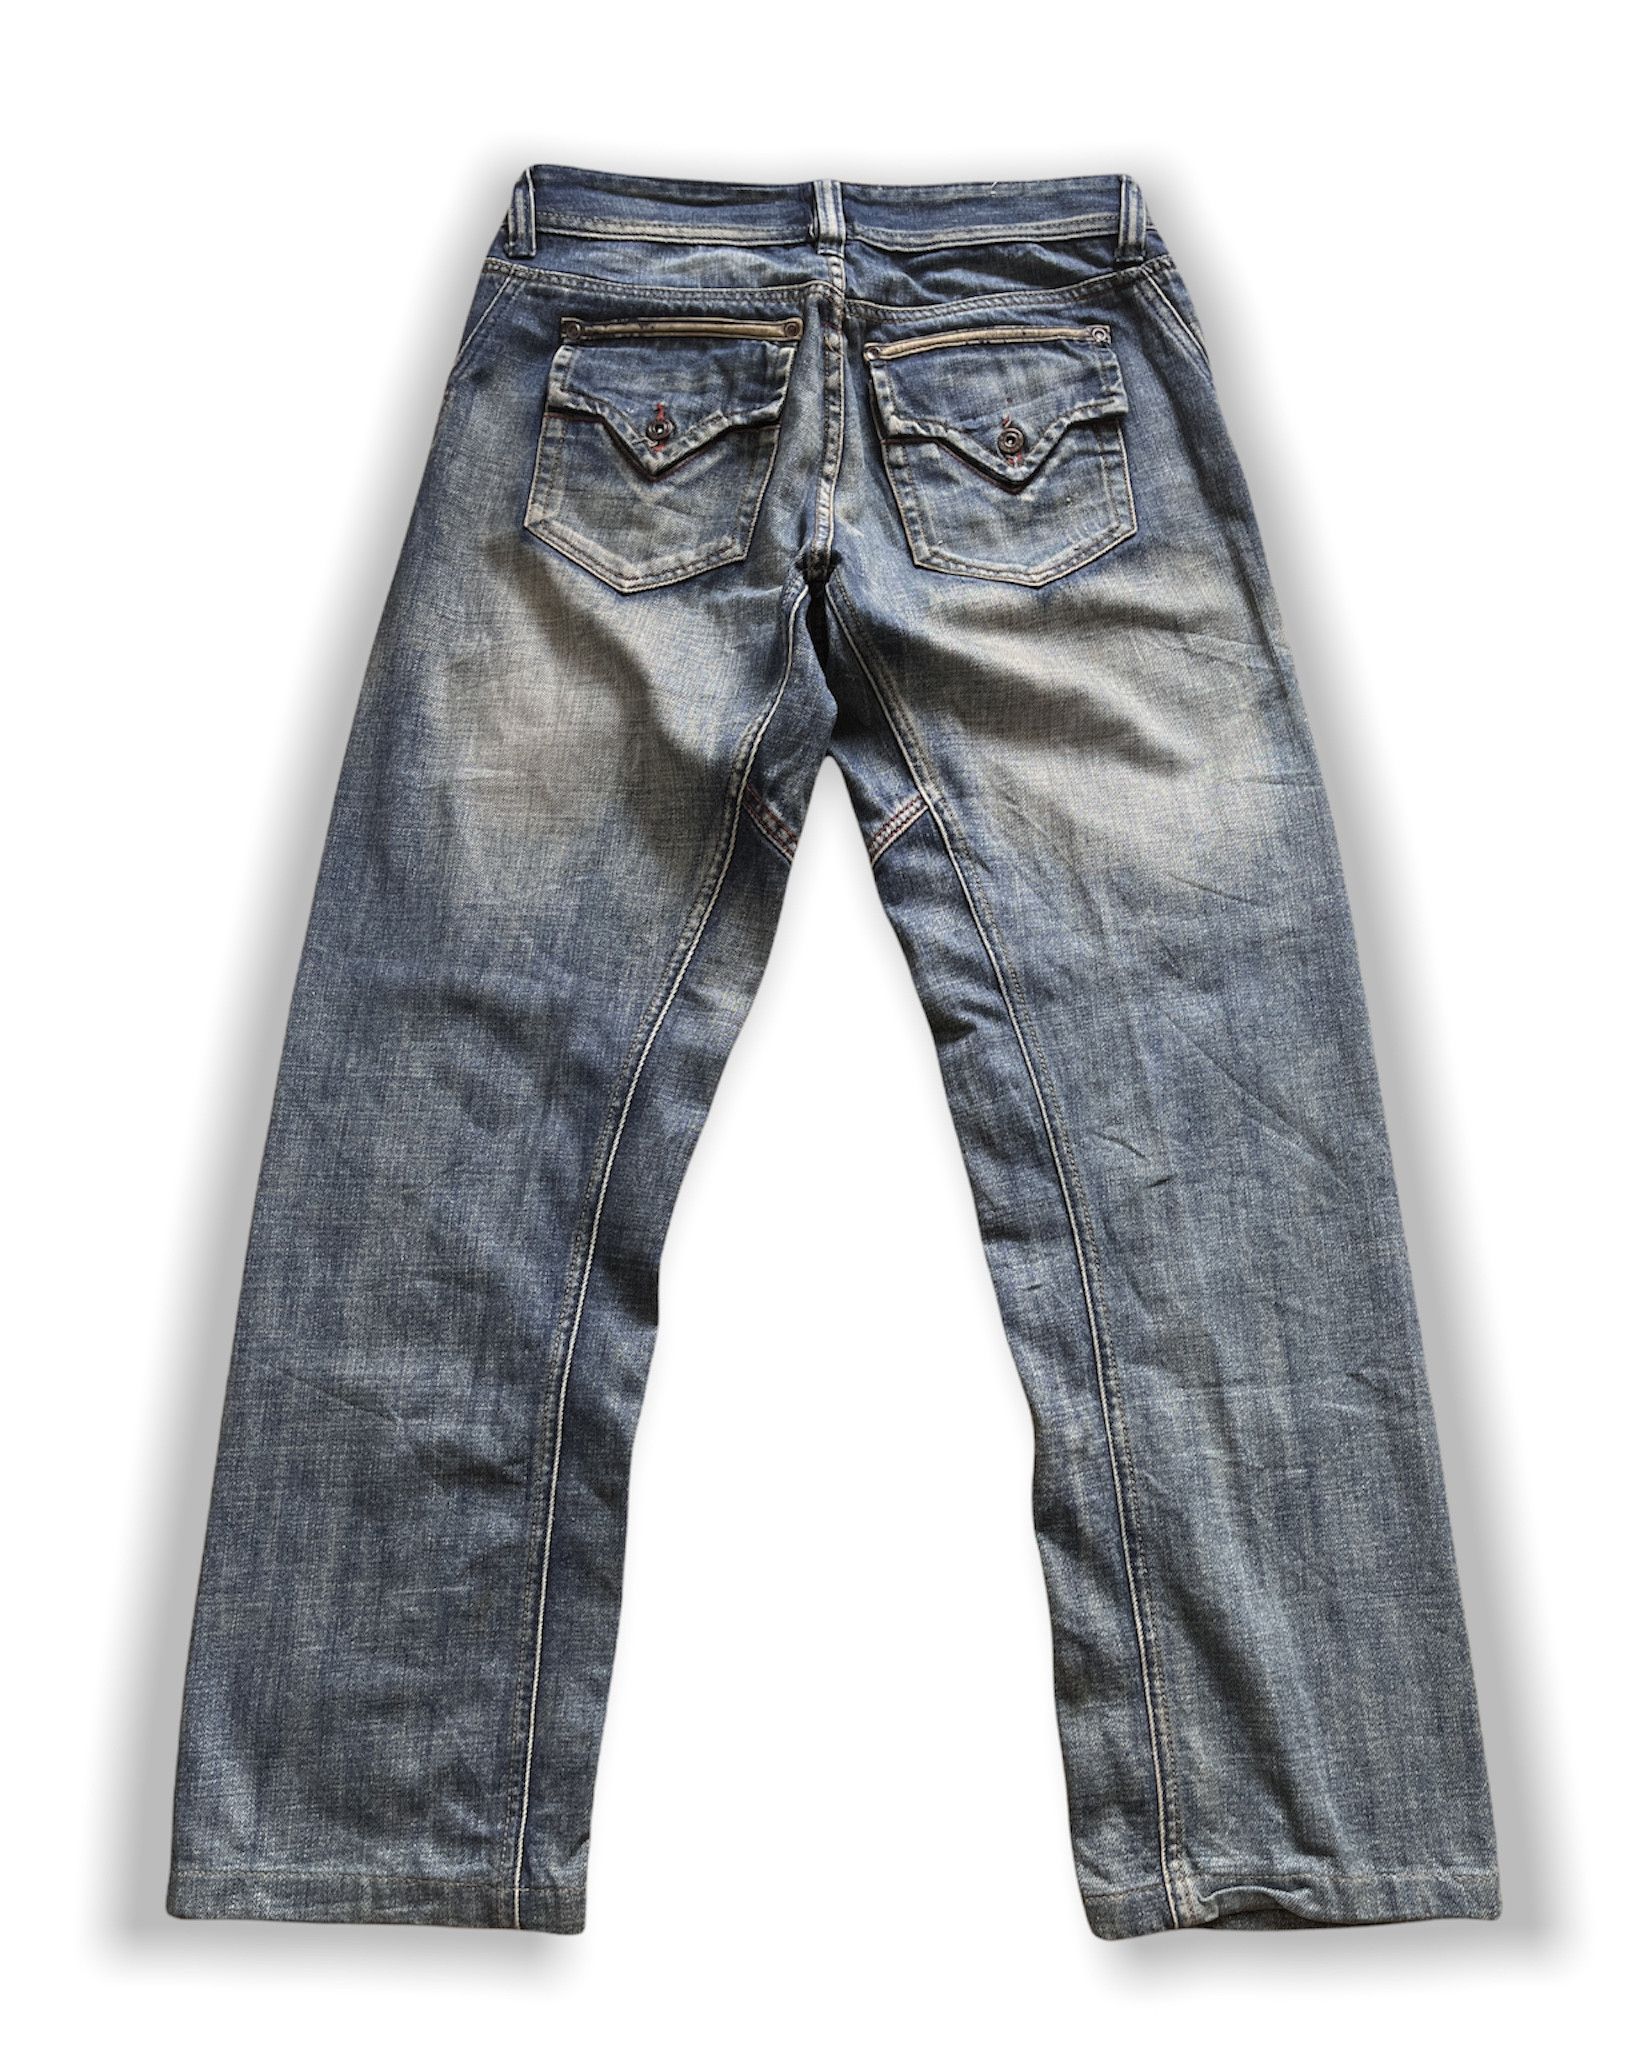 VINTAGE FADED DIESEL FLARE DENIM JEANS MADE IN ITALY - 11